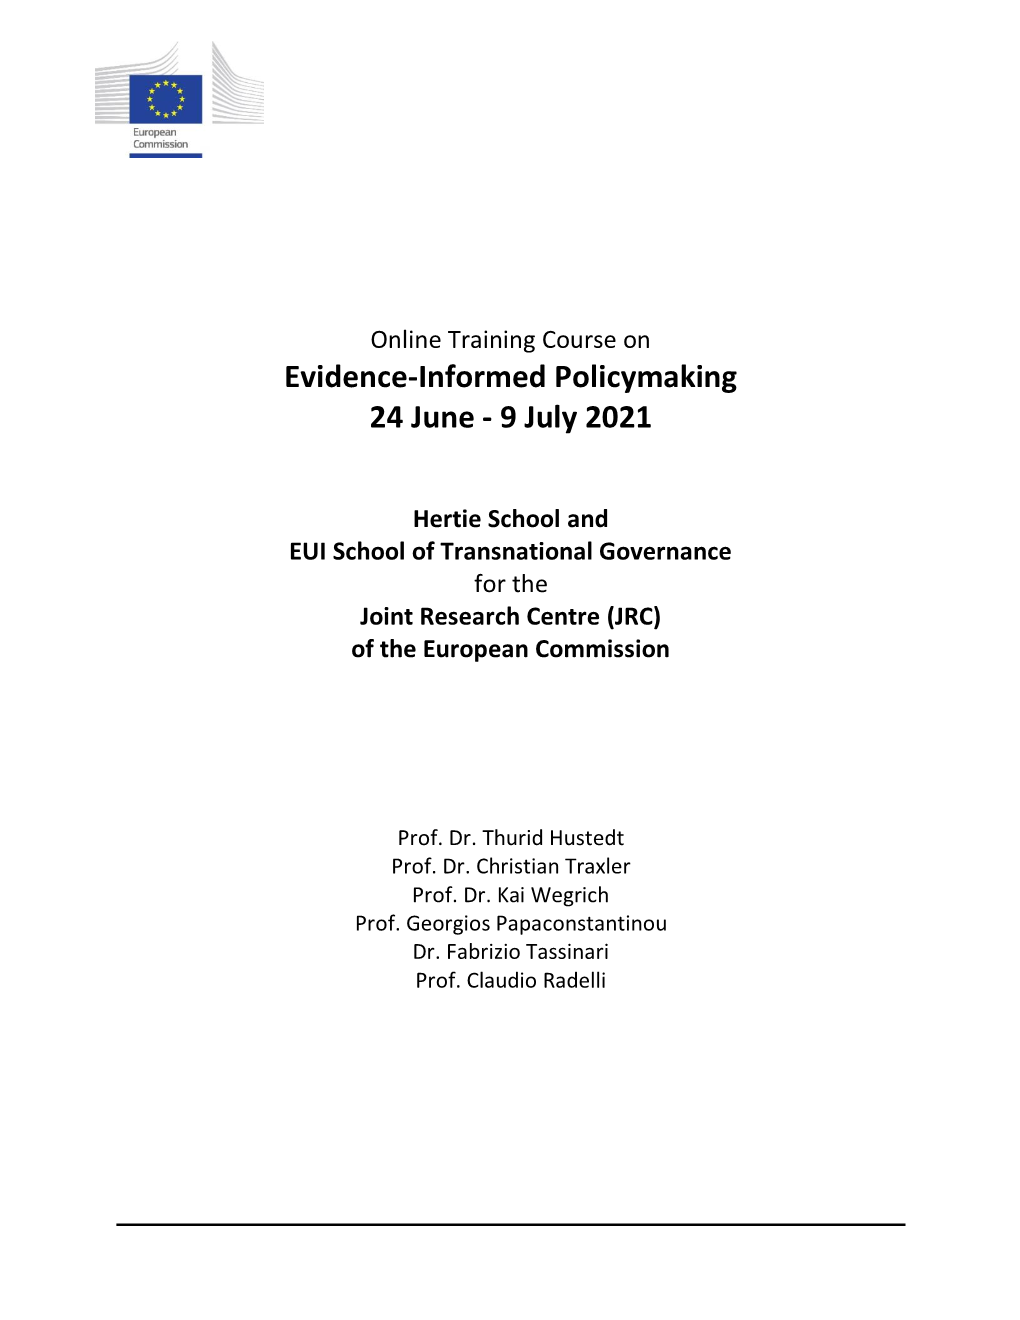 Evidence-Informed Policymaking 24 June - 9 July 2021